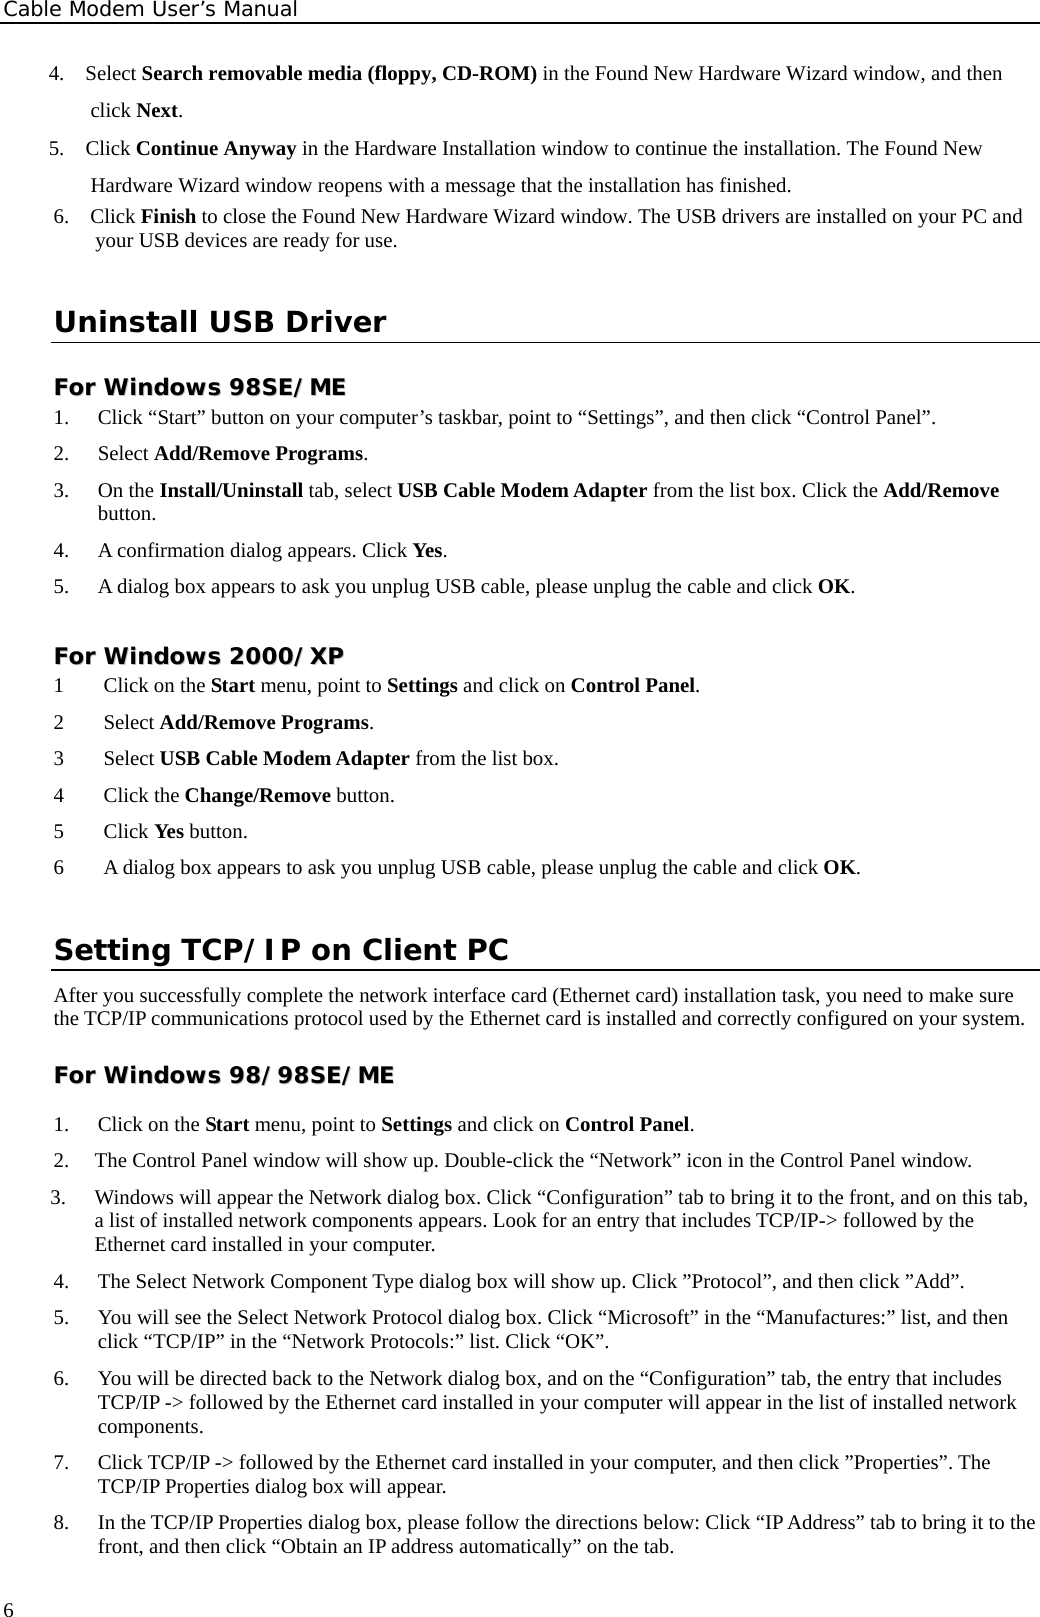 Cable Modem User’s Manual 4.  Select Search removable media (floppy, CD-ROM) in the Found New Hardware Wizard window, and then click Next. 5.  Click Continue Anyway in the Hardware Installation window to continue the installation. The Found New Hardware Wizard window reopens with a message that the installation has finished. 6.  Click Finish to close the Found New Hardware Wizard window. The USB drivers are installed on your PC and your USB devices are ready for use. Uninstall USB Driver FFoorr  WWiinnddoowwss  9988SSEE//MMEE    1.  Click “Start” button on your computer’s taskbar, point to “Settings”, and then click “Control Panel”. 2. Select Add/Remove Programs. 3. On the Install/Uninstall tab, select USB Cable Modem Adapter from the list box. Click the Add/Remove button. 4.  A confirmation dialog appears. Click Yes. 5.  A dialog box appears to ask you unplug USB cable, please unplug the cable and click OK. FFoorr  WWiinnddoowwss  22000000//XXPP  1  Click on the Start menu, point to Settings and click on Control Panel. 2 Select Add/Remove Programs. 3 Select USB Cable Modem Adapter from the list box. 4 Click the Change/Remove button. 5 Click Yes button. 6  A dialog box appears to ask you unplug USB cable, please unplug the cable and click OK. Setting TCP/IP on Client PC After you successfully complete the network interface card (Ethernet card) installation task, you need to make sure the TCP/IP communications protocol used by the Ethernet card is installed and correctly configured on your system.  FFoorr  WWiinnddoowwss  9988//9988SSEE//MMEE  1.  Click on the Start menu, point to Settings and click on Control Panel. 2.  The Control Panel window will show up. Double-click the “Network” icon in the Control Panel window.   3.  Windows will appear the Network dialog box. Click “Configuration” tab to bring it to the front, and on this tab, a list of installed network components appears. Look for an entry that includes TCP/IP-&gt; followed by the Ethernet card installed in your computer. 4.  The Select Network Component Type dialog box will show up. Click ”Protocol”, and then click ”Add”. 5.  You will see the Select Network Protocol dialog box. Click “Microsoft” in the “Manufactures:” list, and then click “TCP/IP” in the “Network Protocols:” list. Click “OK”. 6.  You will be directed back to the Network dialog box, and on the “Configuration” tab, the entry that includes TCP/IP -&gt; followed by the Ethernet card installed in your computer will appear in the list of installed network components. 7.  Click TCP/IP -&gt; followed by the Ethernet card installed in your computer, and then click ”Properties”. The TCP/IP Properties dialog box will appear. 8.  In the TCP/IP Properties dialog box, please follow the directions below: Click “IP Address” tab to bring it to the front, and then click “Obtain an IP address automatically” on the tab.  6